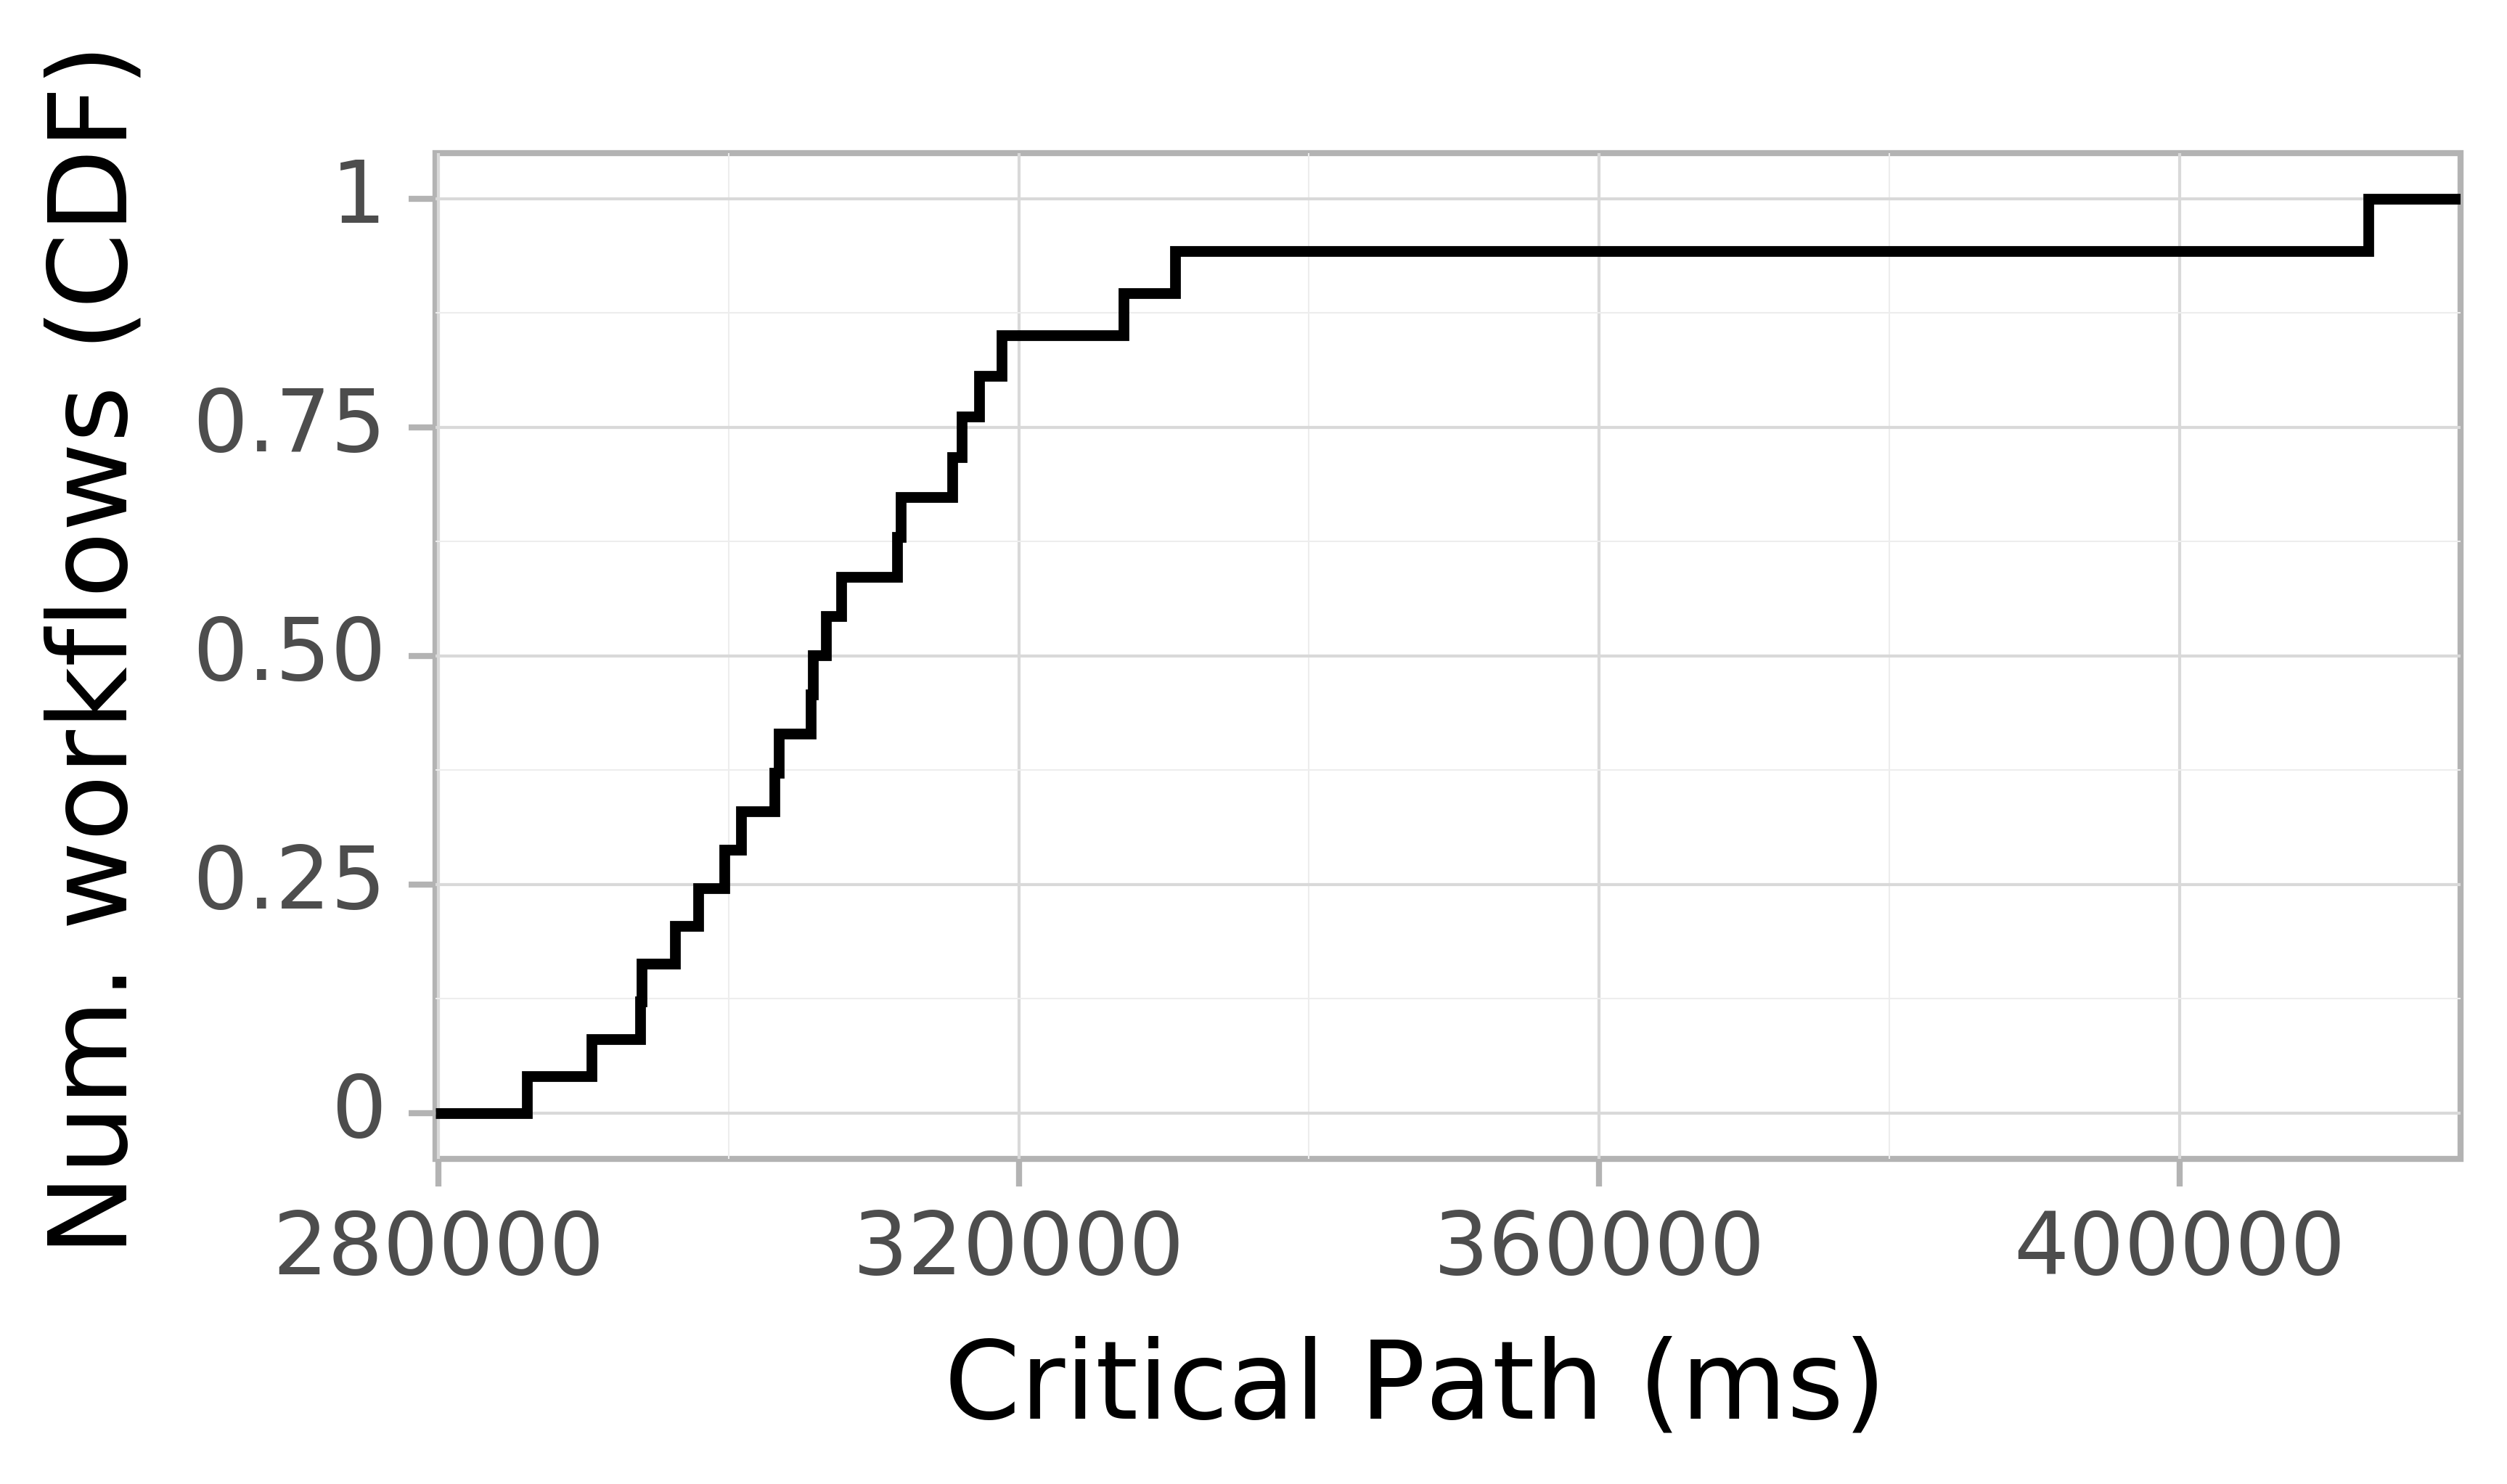 Job runtime CDF graph for the askalon-new_ee28 trace.